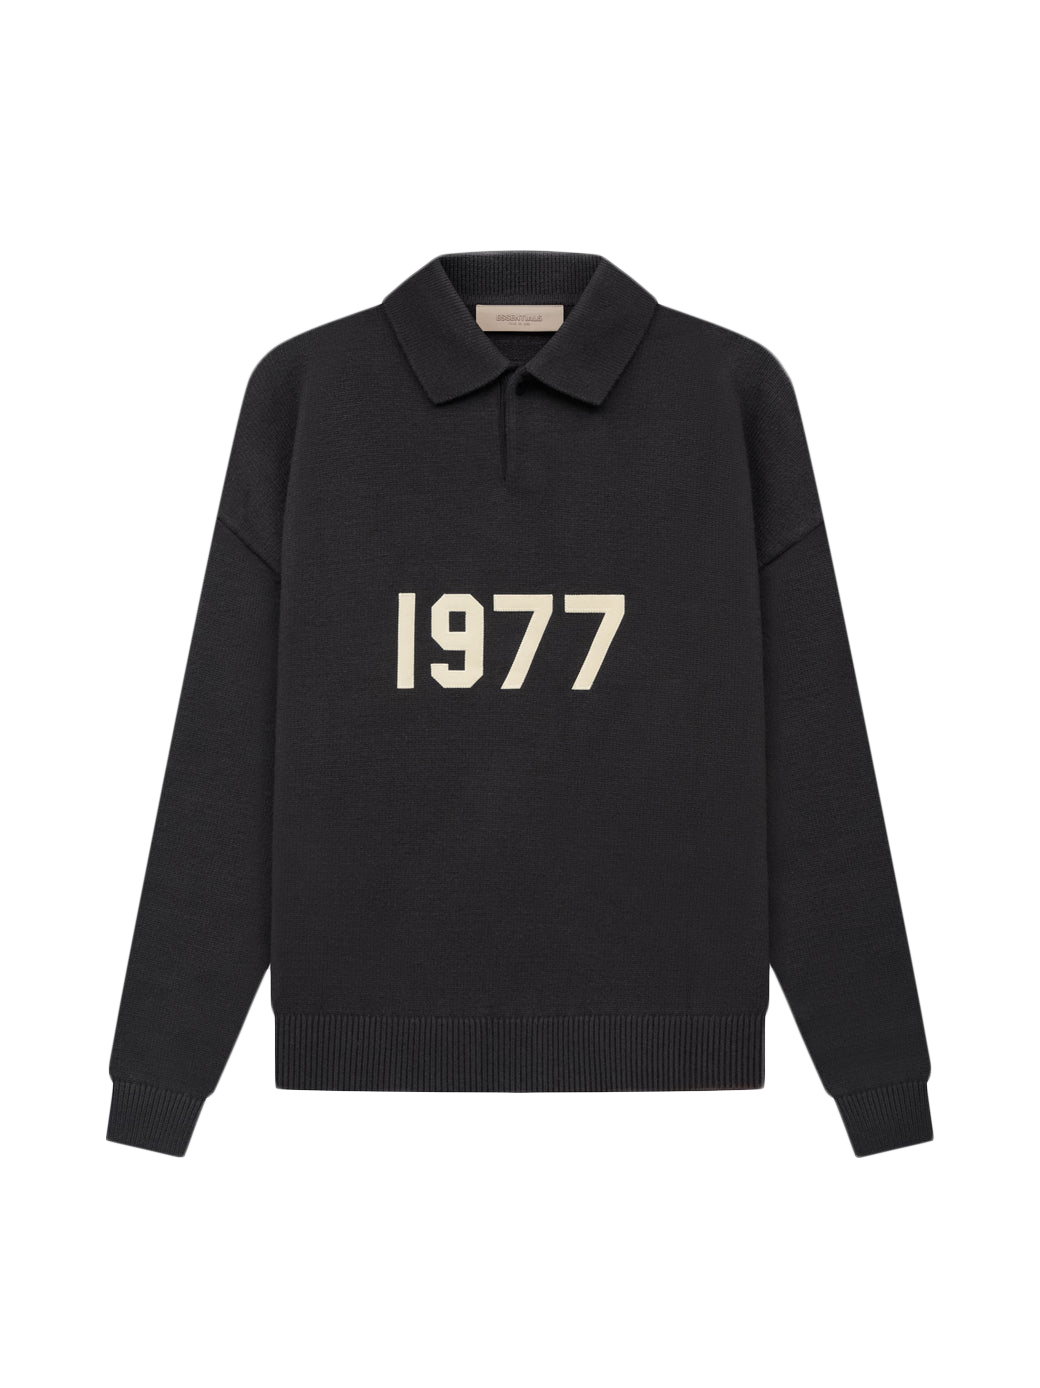 Fear of god Essentials 1977 knit Polo